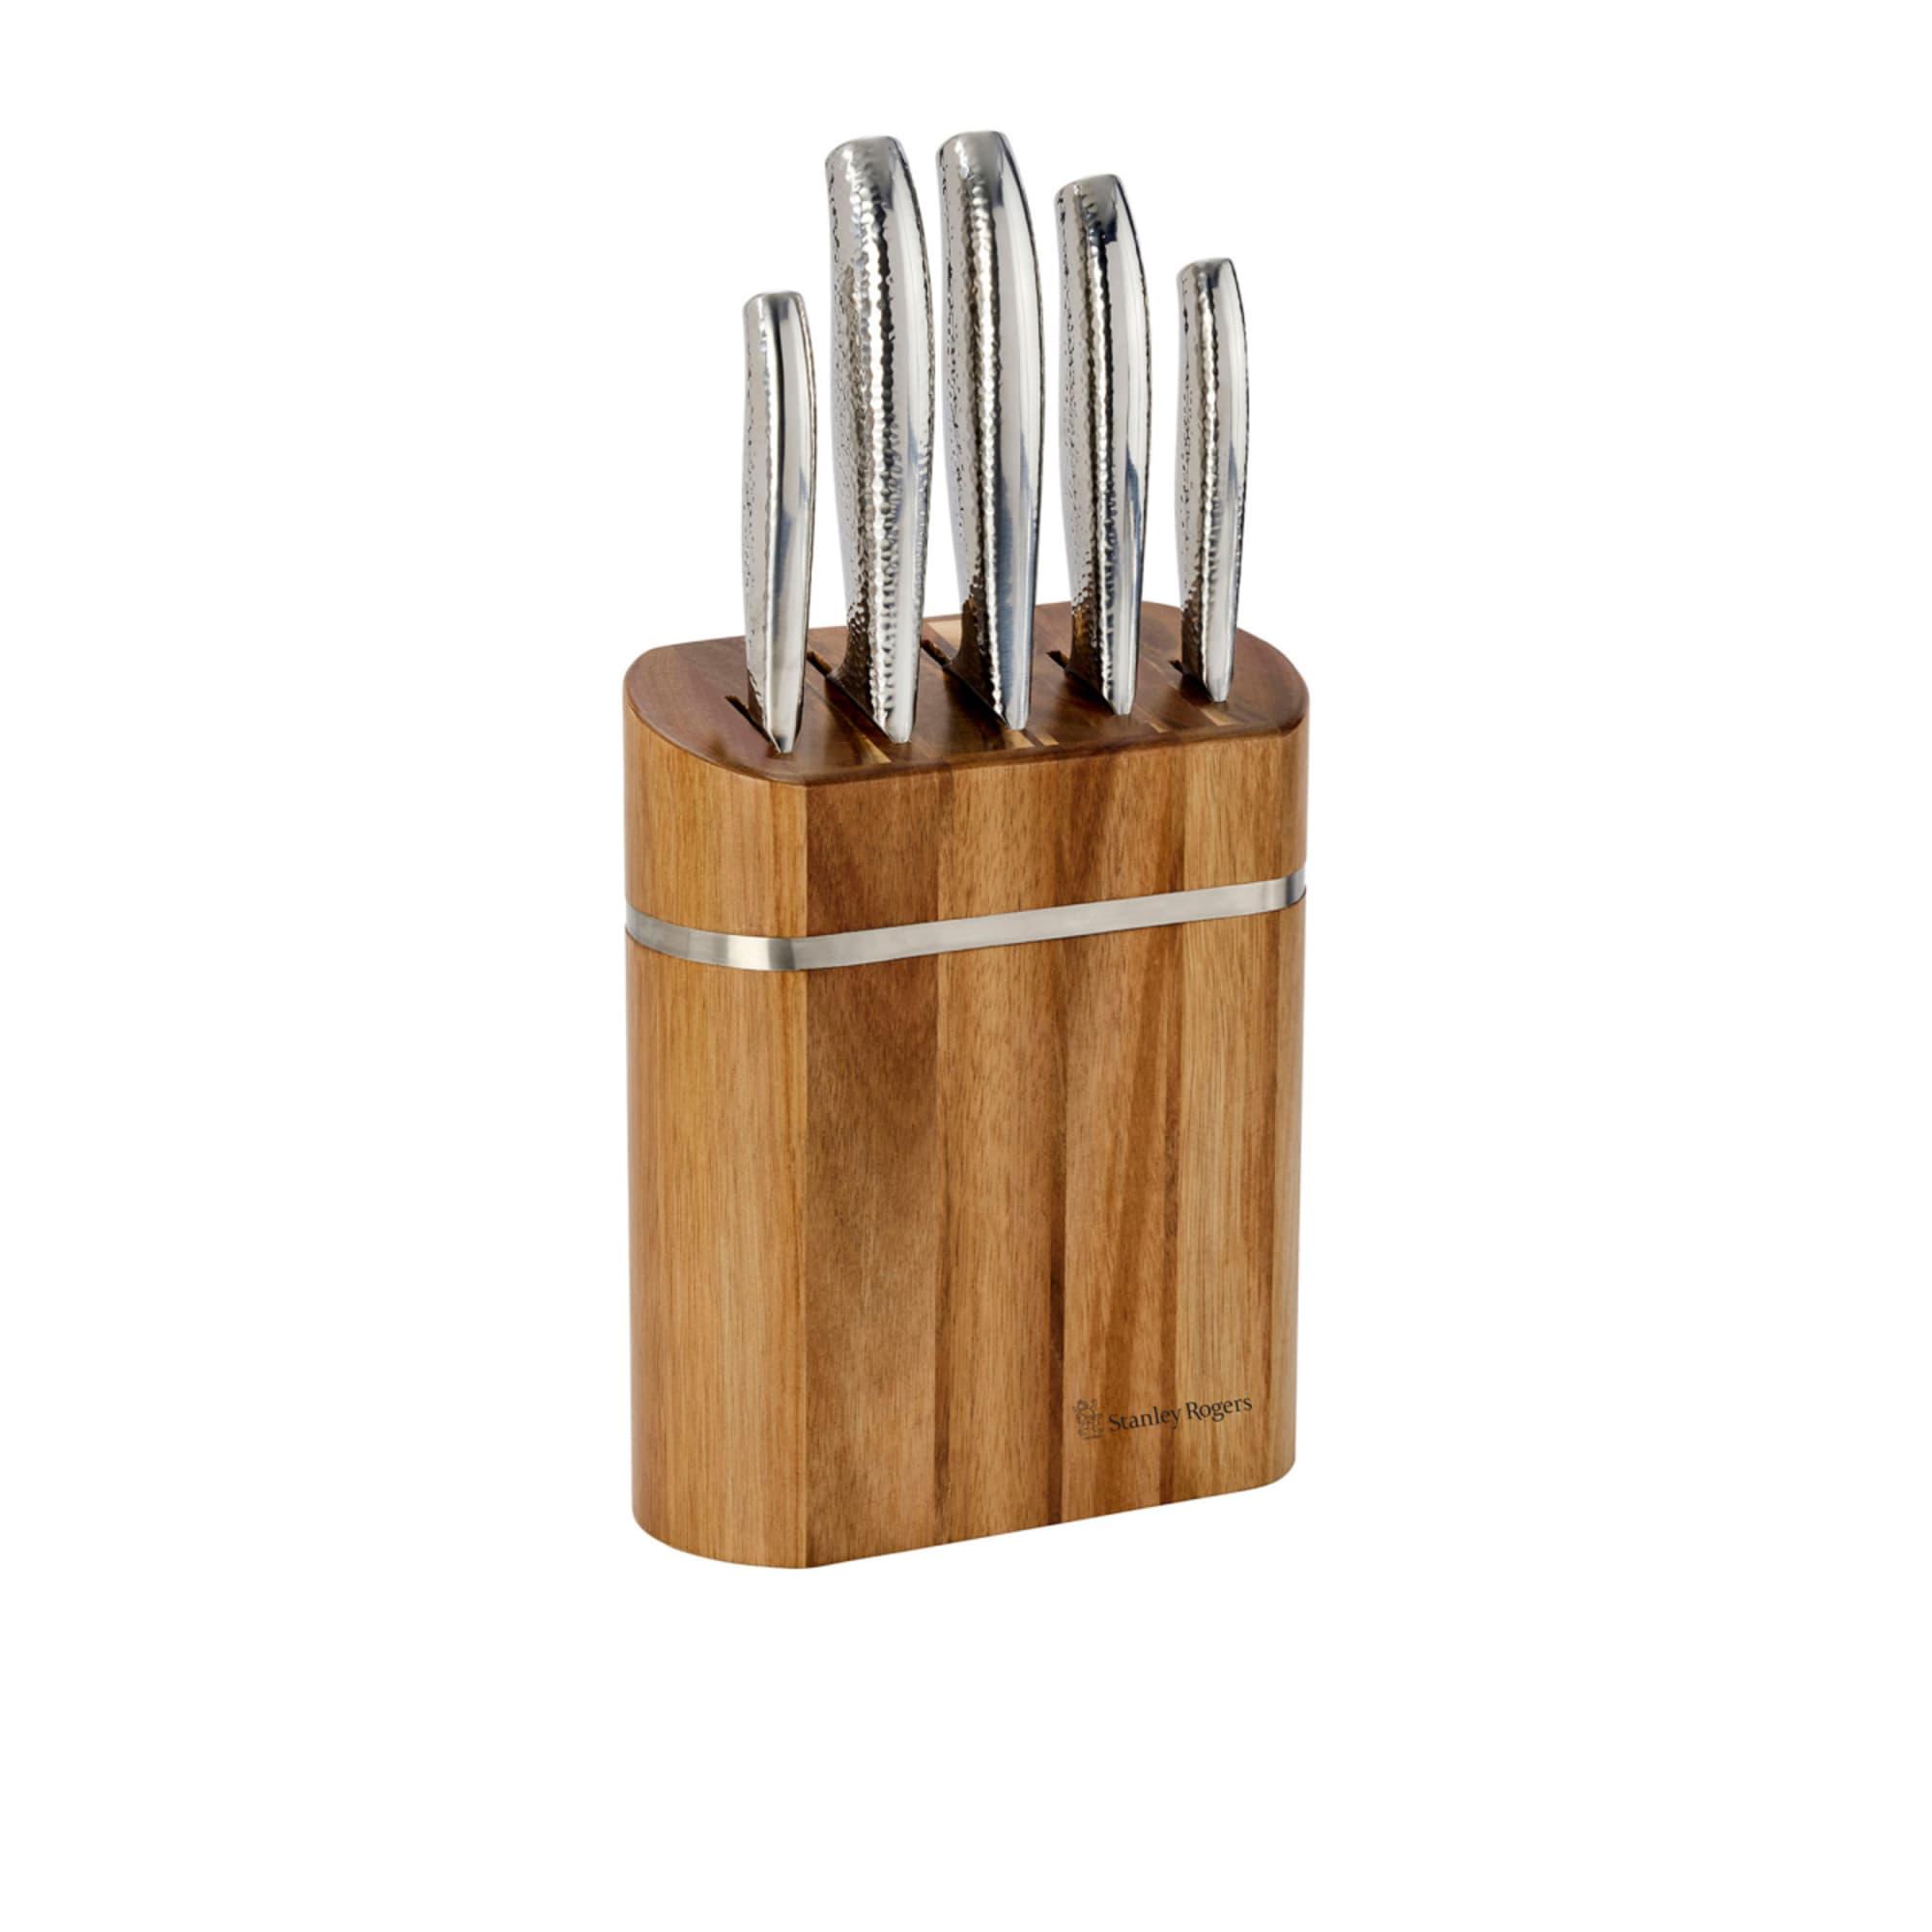 Stanley Rogers 6pc Oval Domed Knife Block Set Image 2